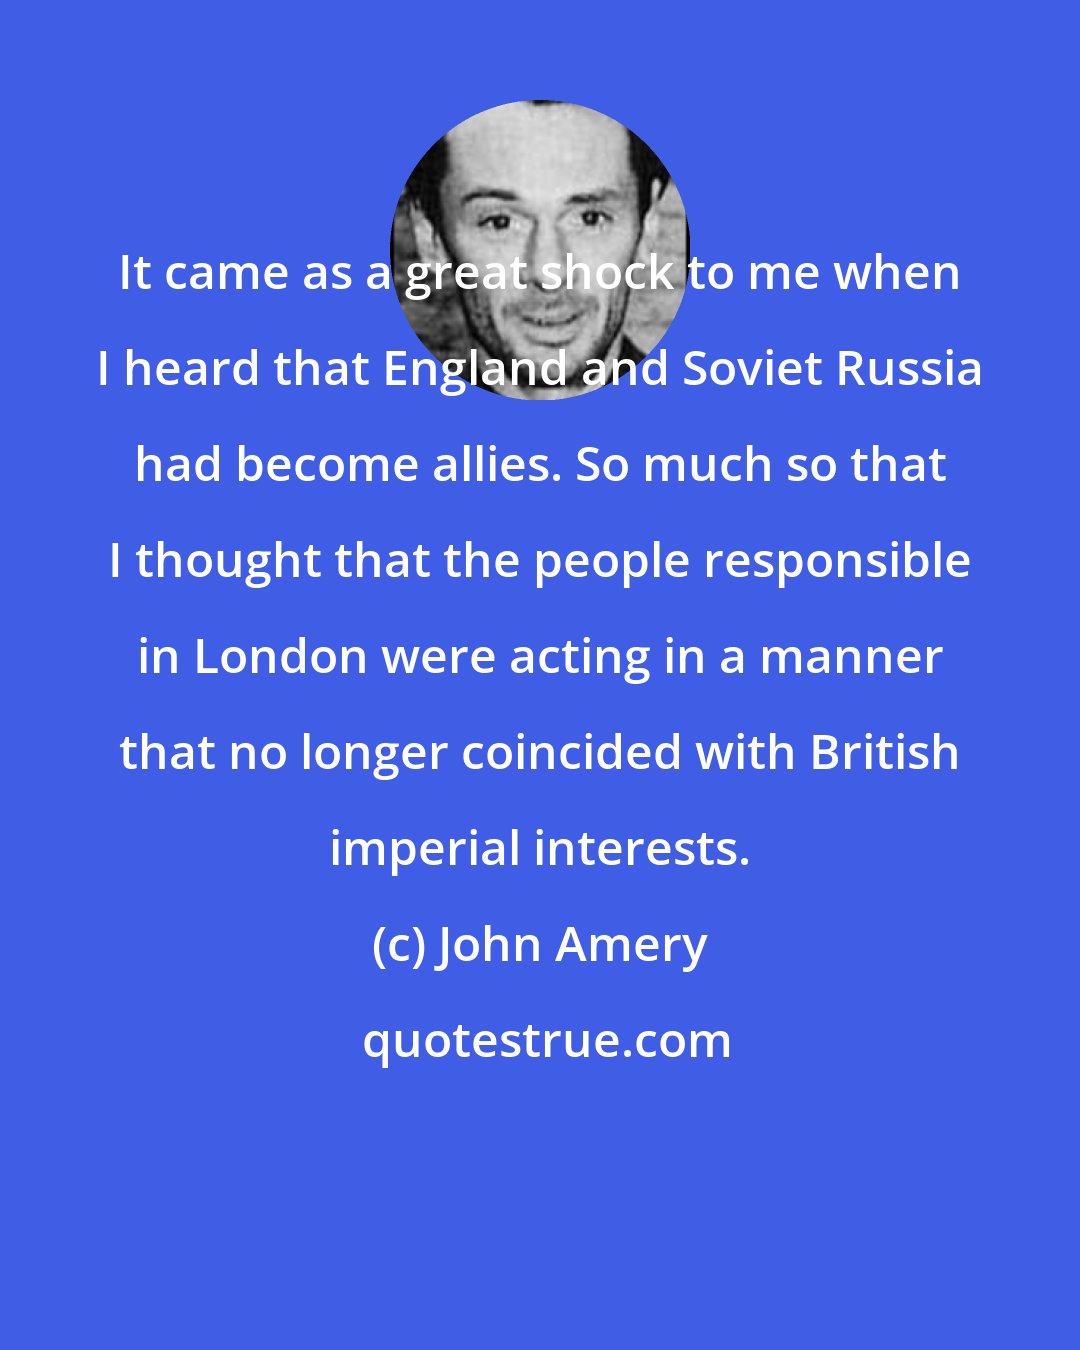 John Amery: It came as a great shock to me when I heard that England and Soviet Russia had become allies. So much so that I thought that the people responsible in London were acting in a manner that no longer coincided with British imperial interests.